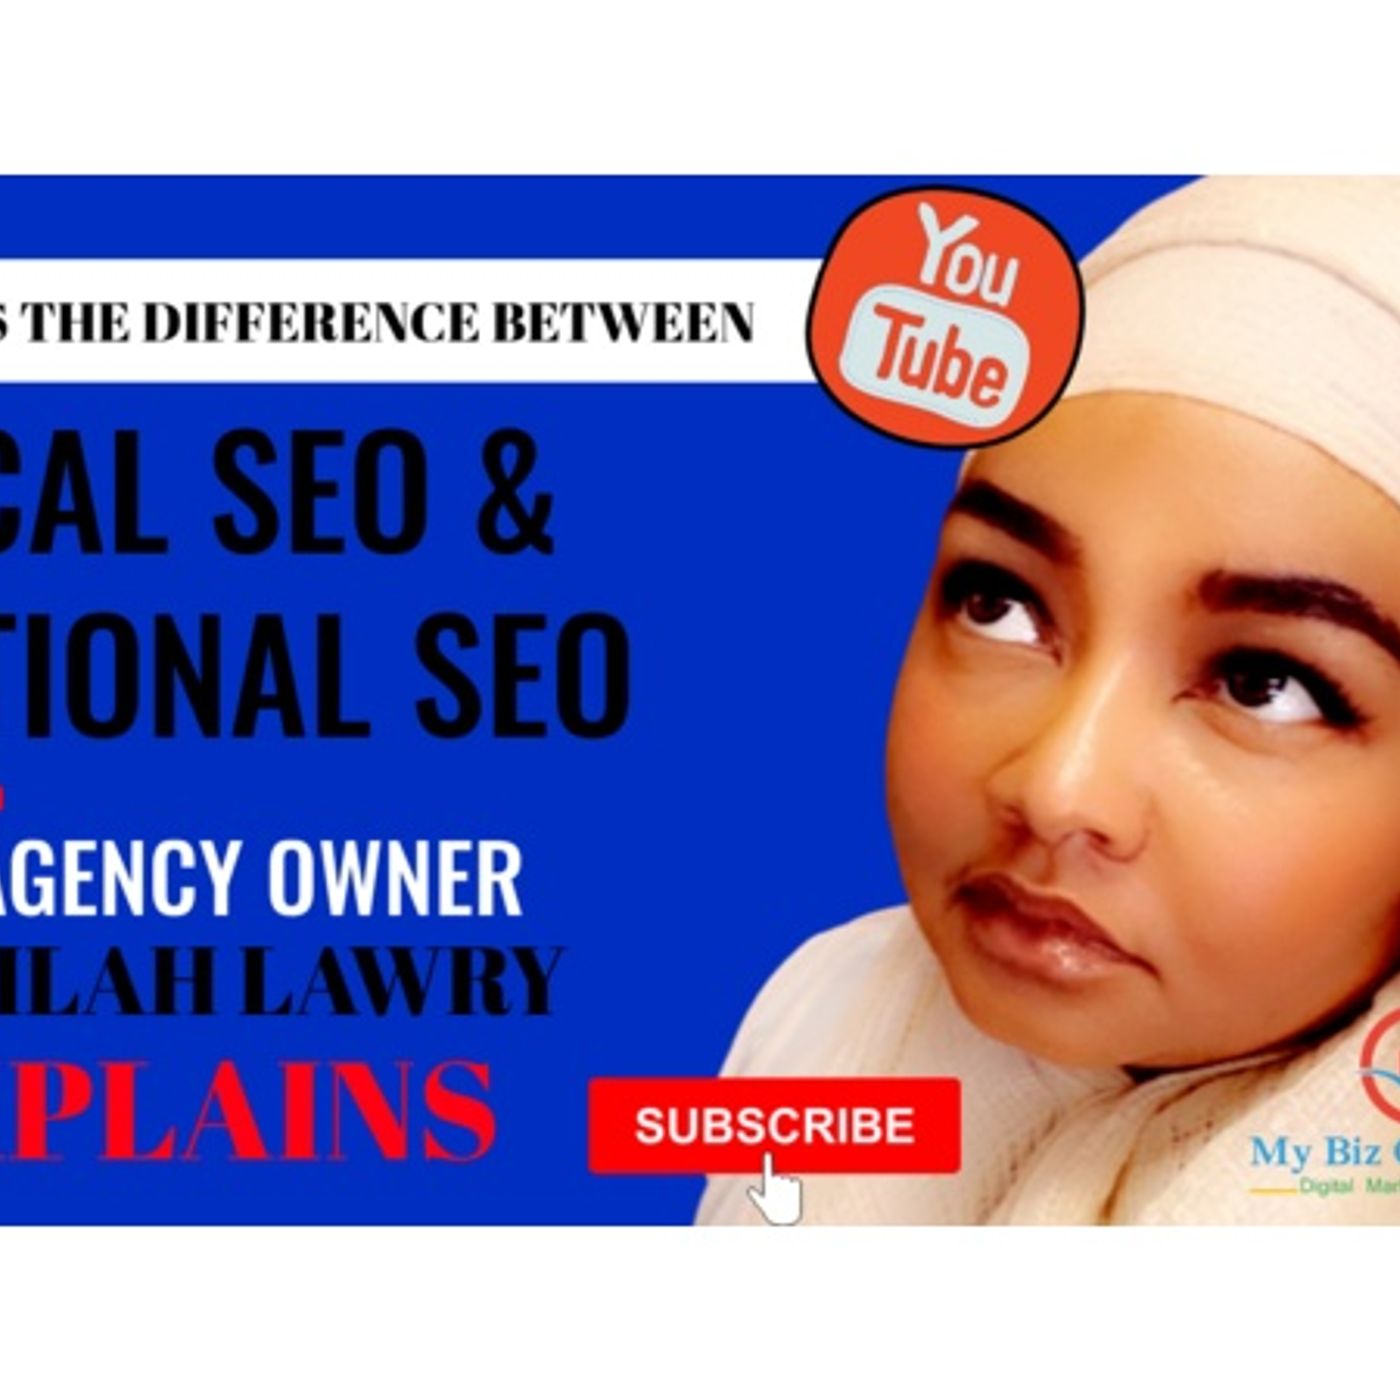 Local SEO vs National SEO ...What's the difference? Call in live 914-205-5389